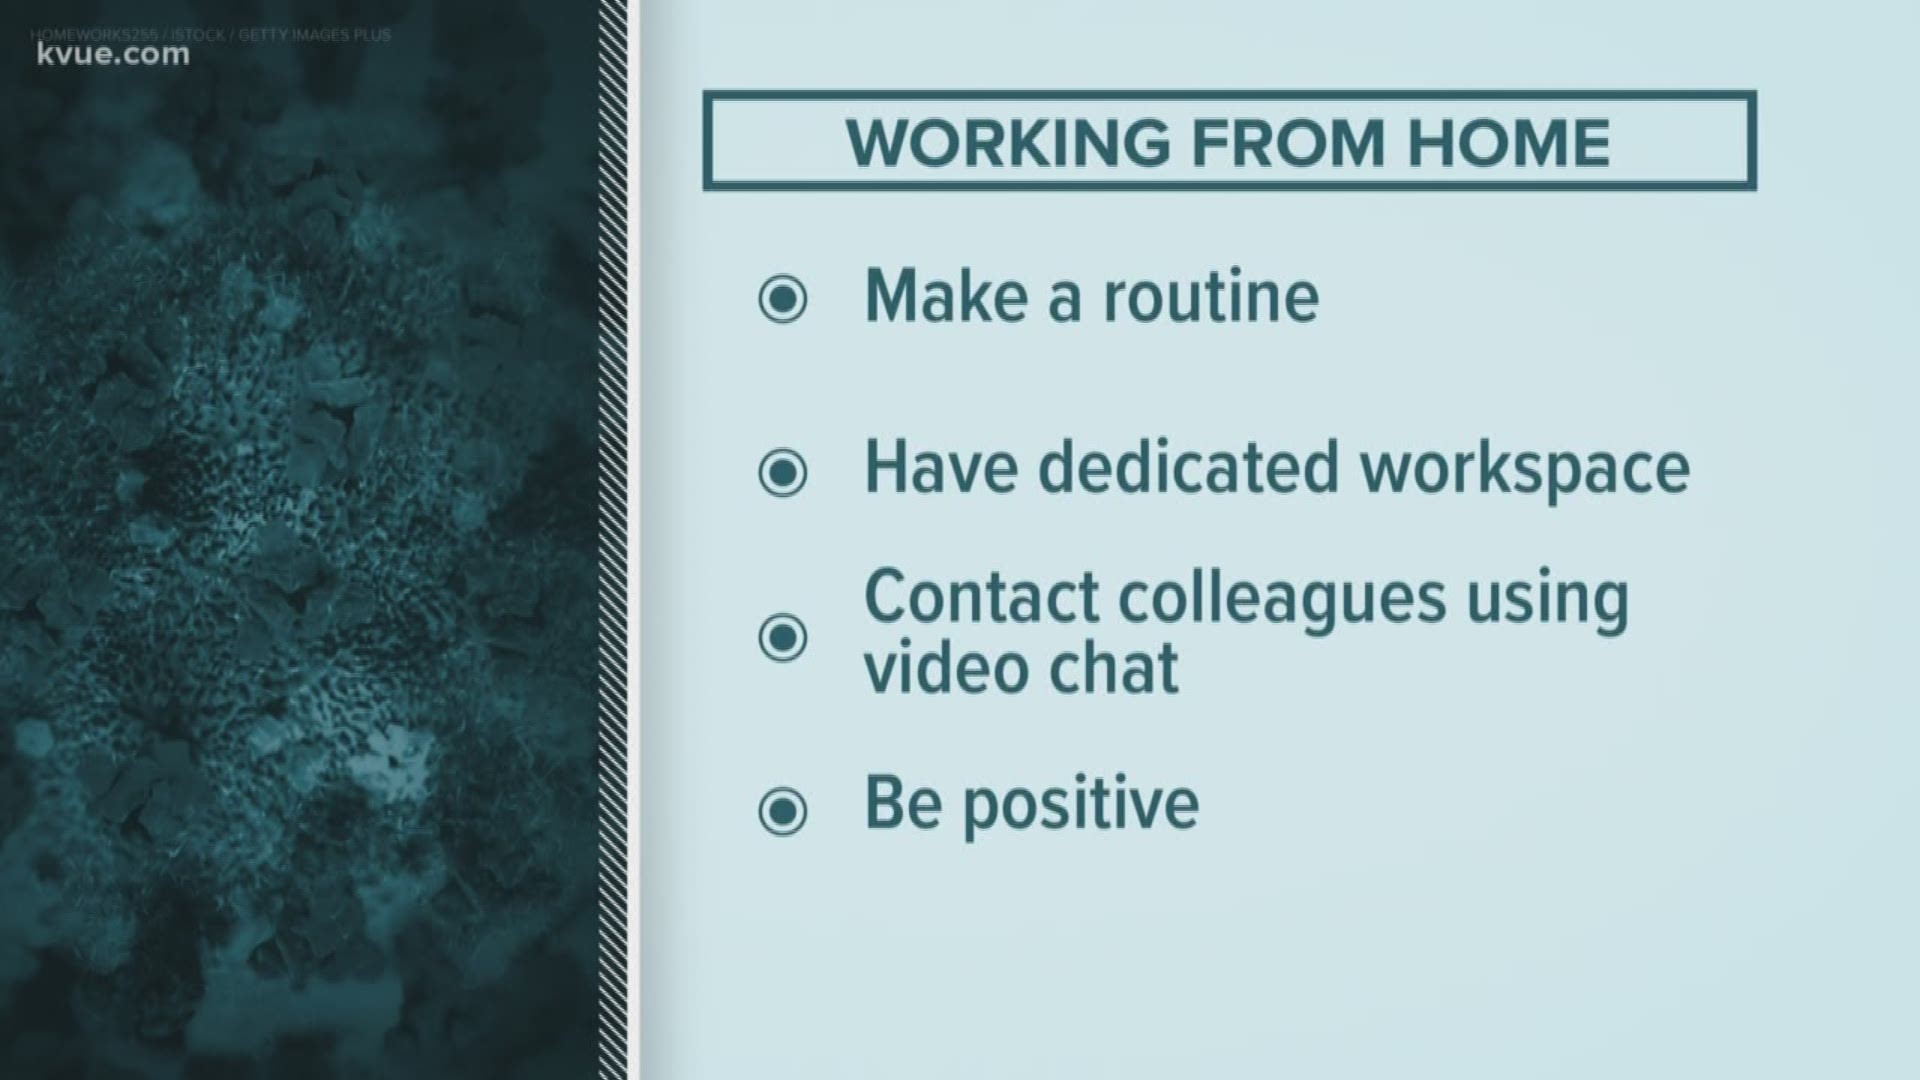 As more of us start working from home, we know it can be challenging to stay productive.